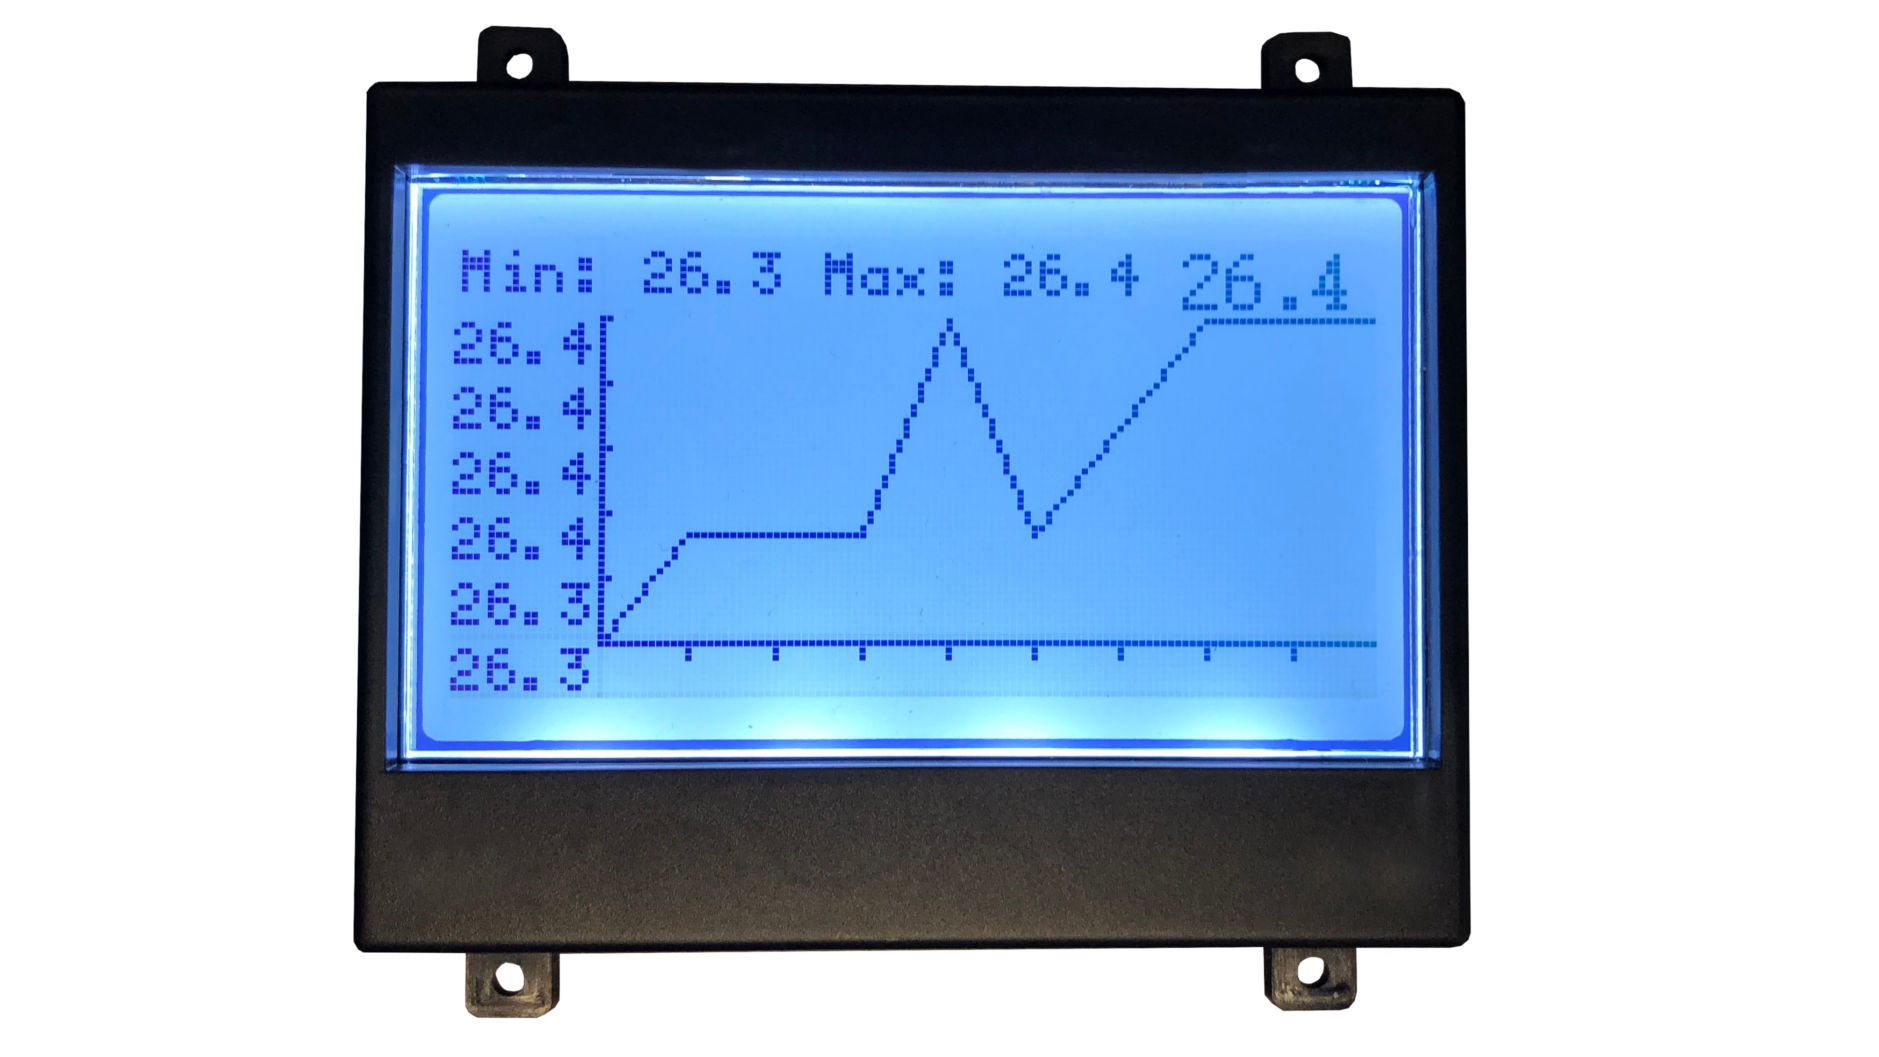 Graphing with the Graphic LCD Phidget